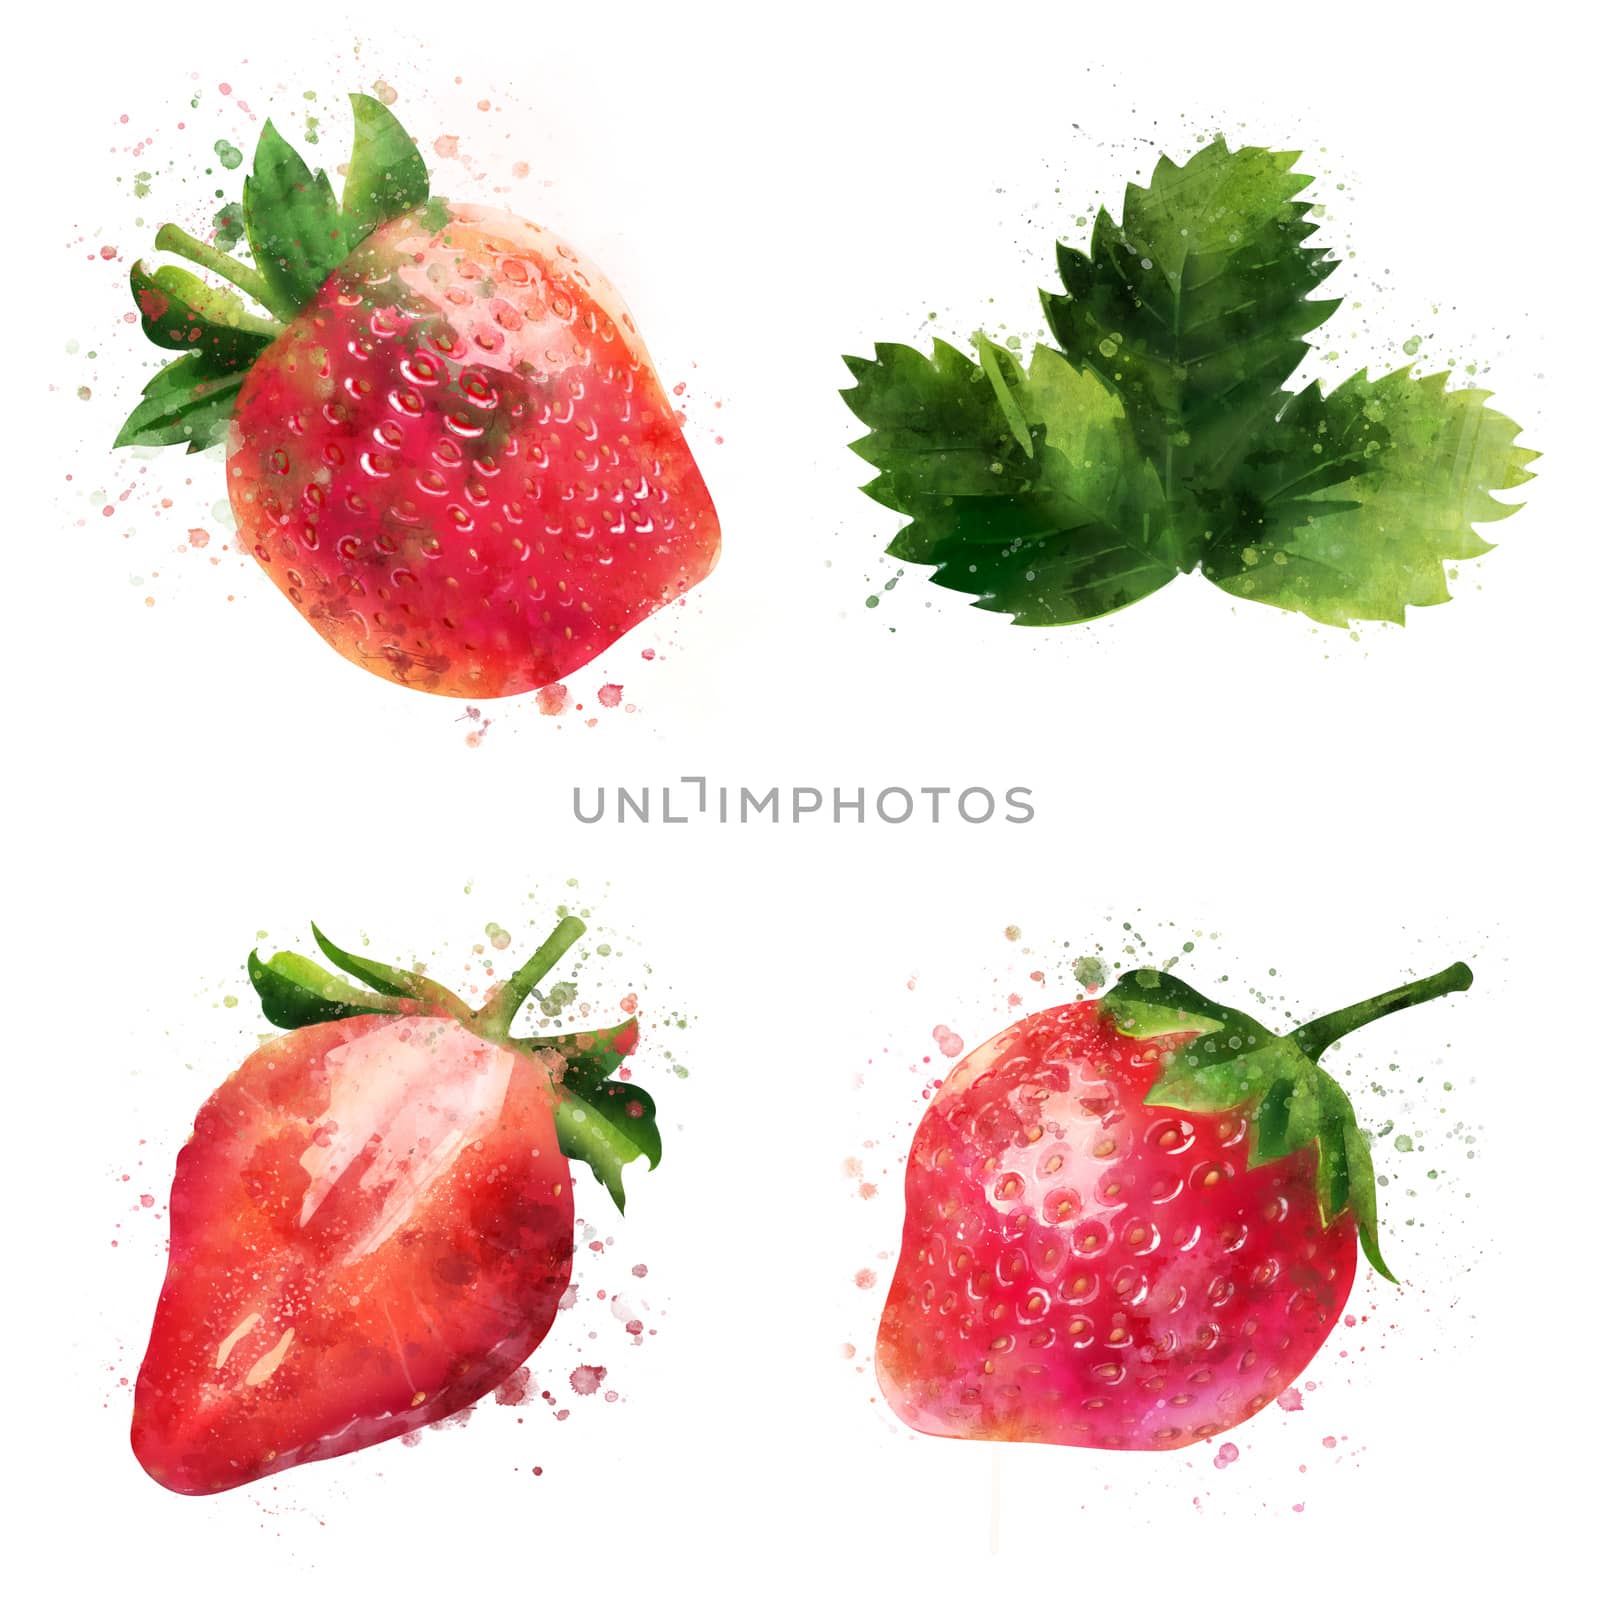 Strawberry on white background. Watercolor illustration by ConceptCafe